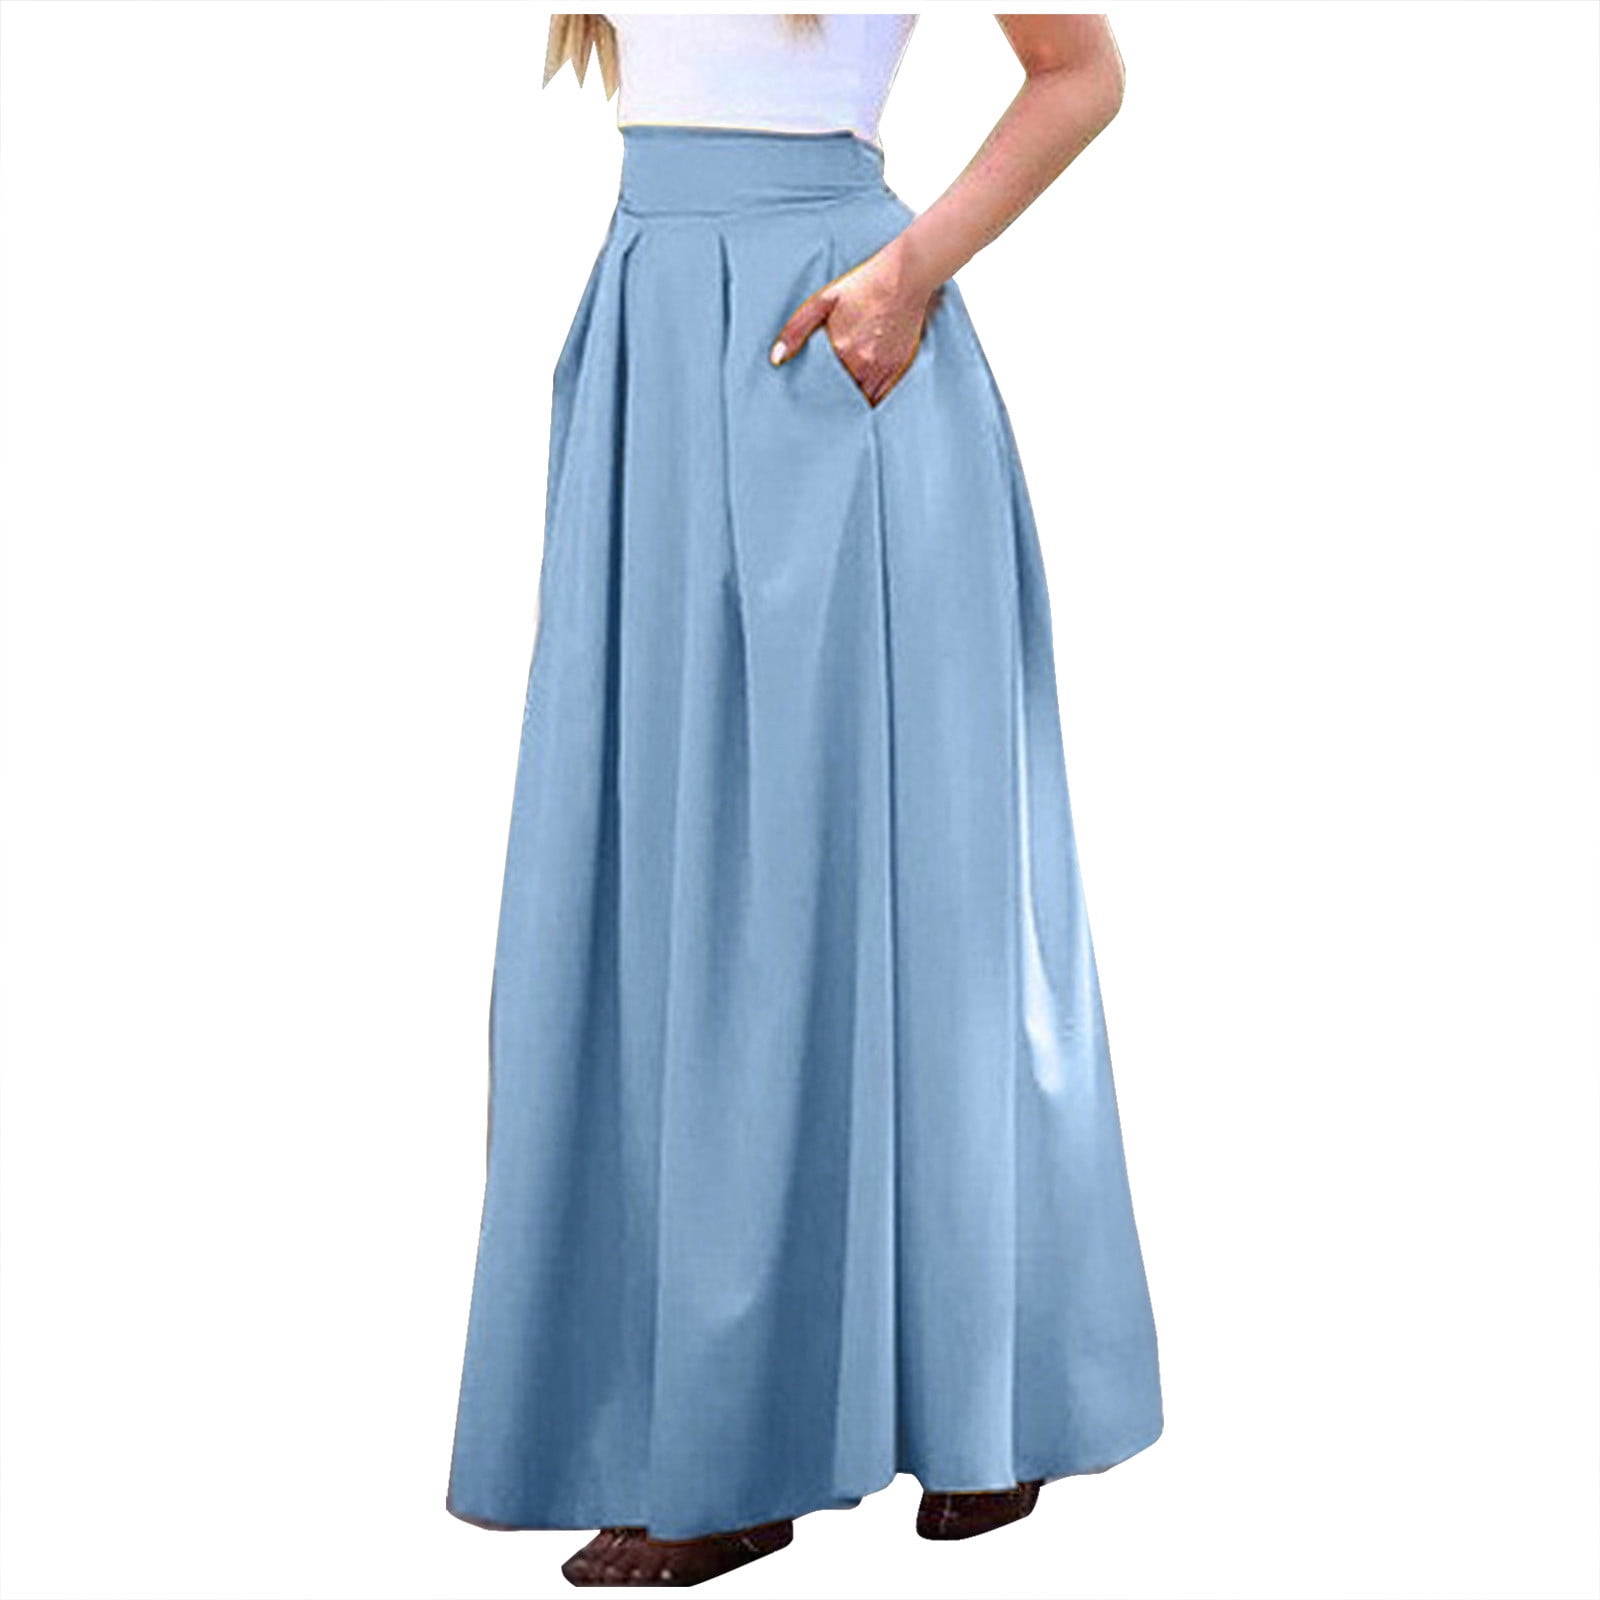 Buy Stars and You Women's Floor Length Long Skirt with Slit (Stars and You Long  Skirt with Slit_Black_XS) at Amazon.in